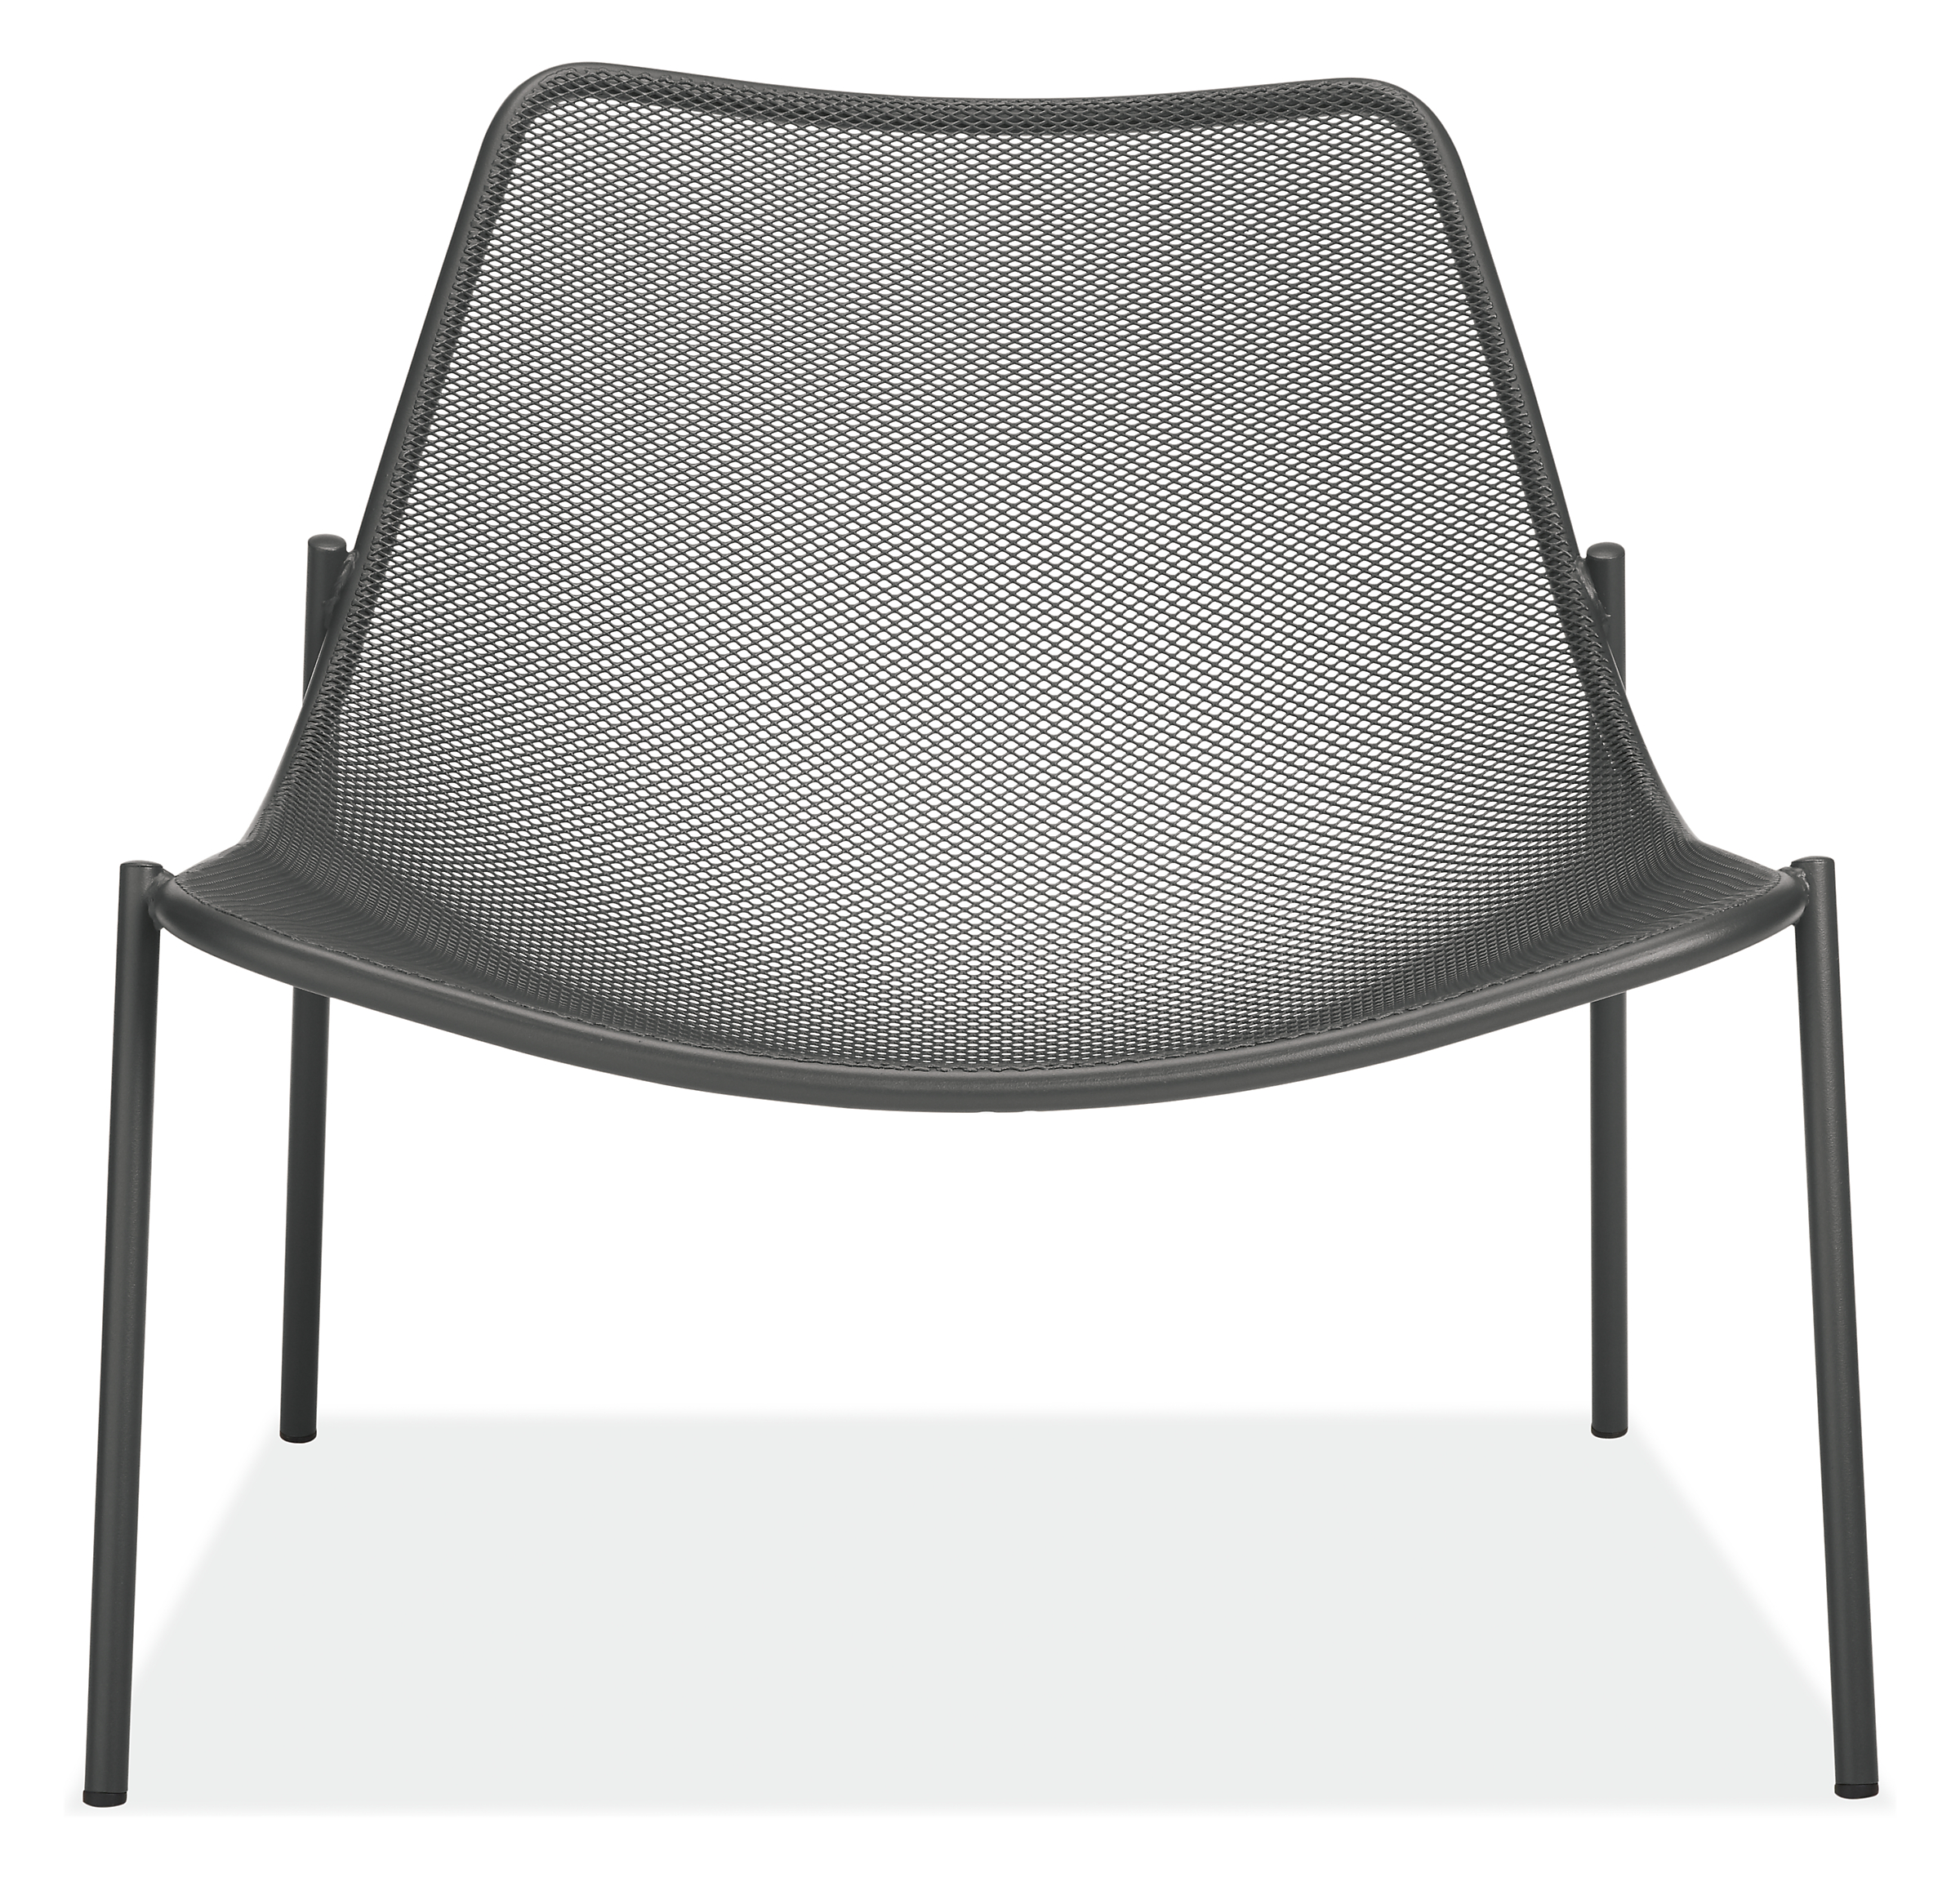 Front view of Soleil Lounge Chair in Graphite.